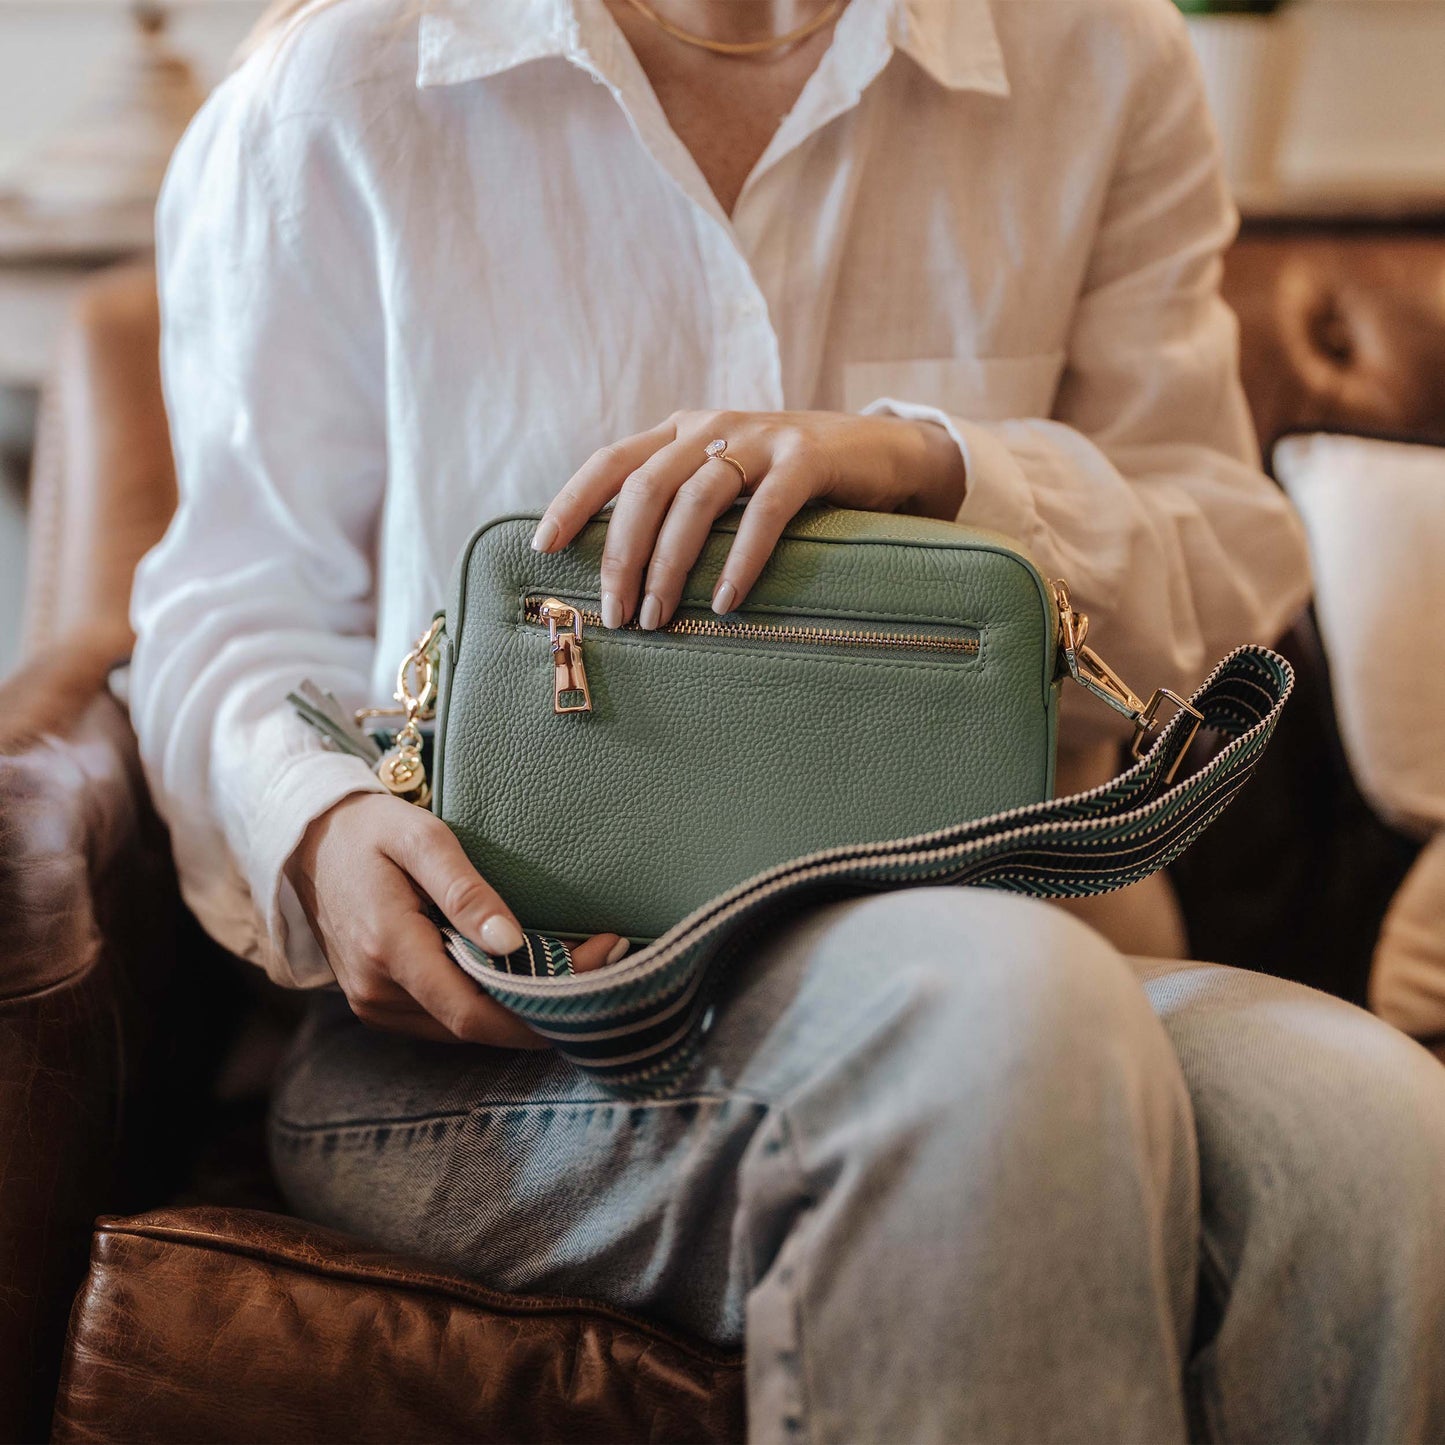 Stratford Bag Mint Green - On Person